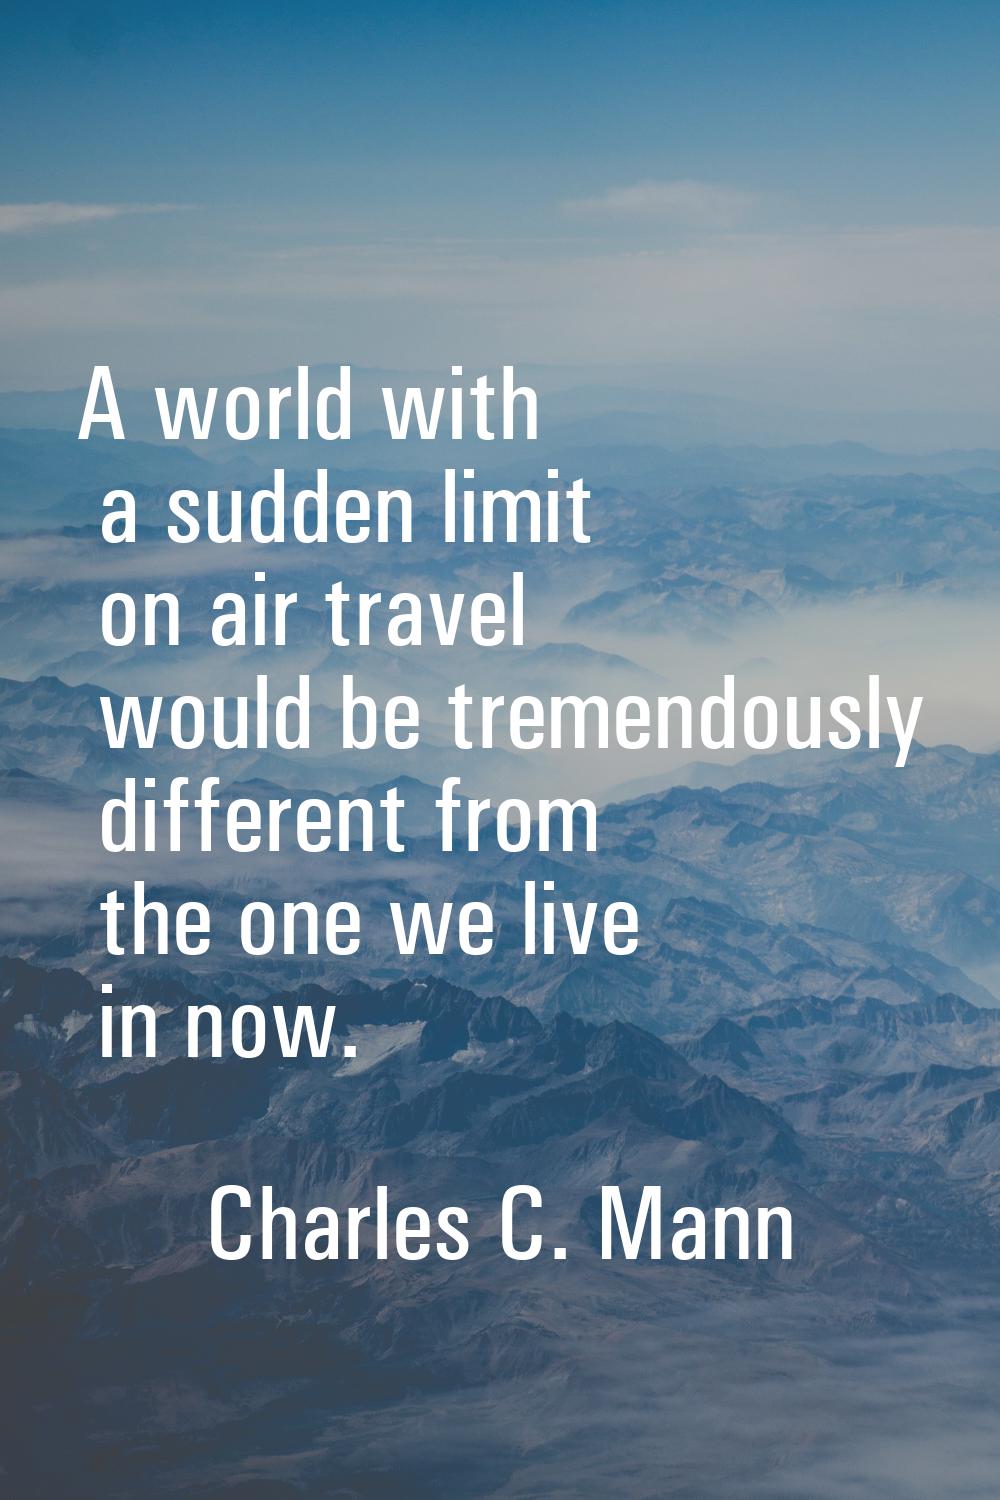 A world with a sudden limit on air travel would be tremendously different from the one we live in n